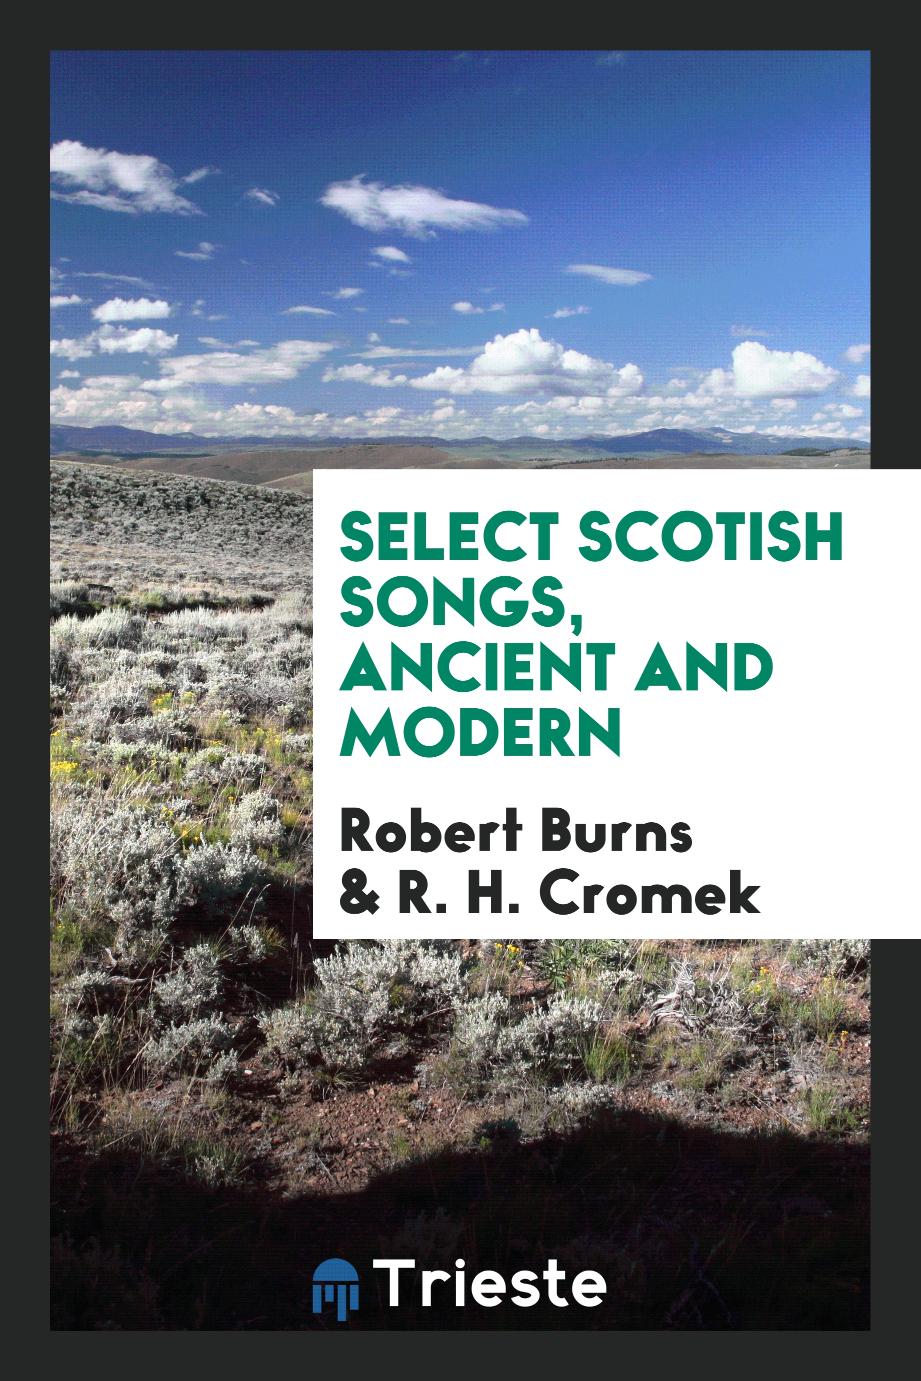 Select Scotish songs, ancient and modern